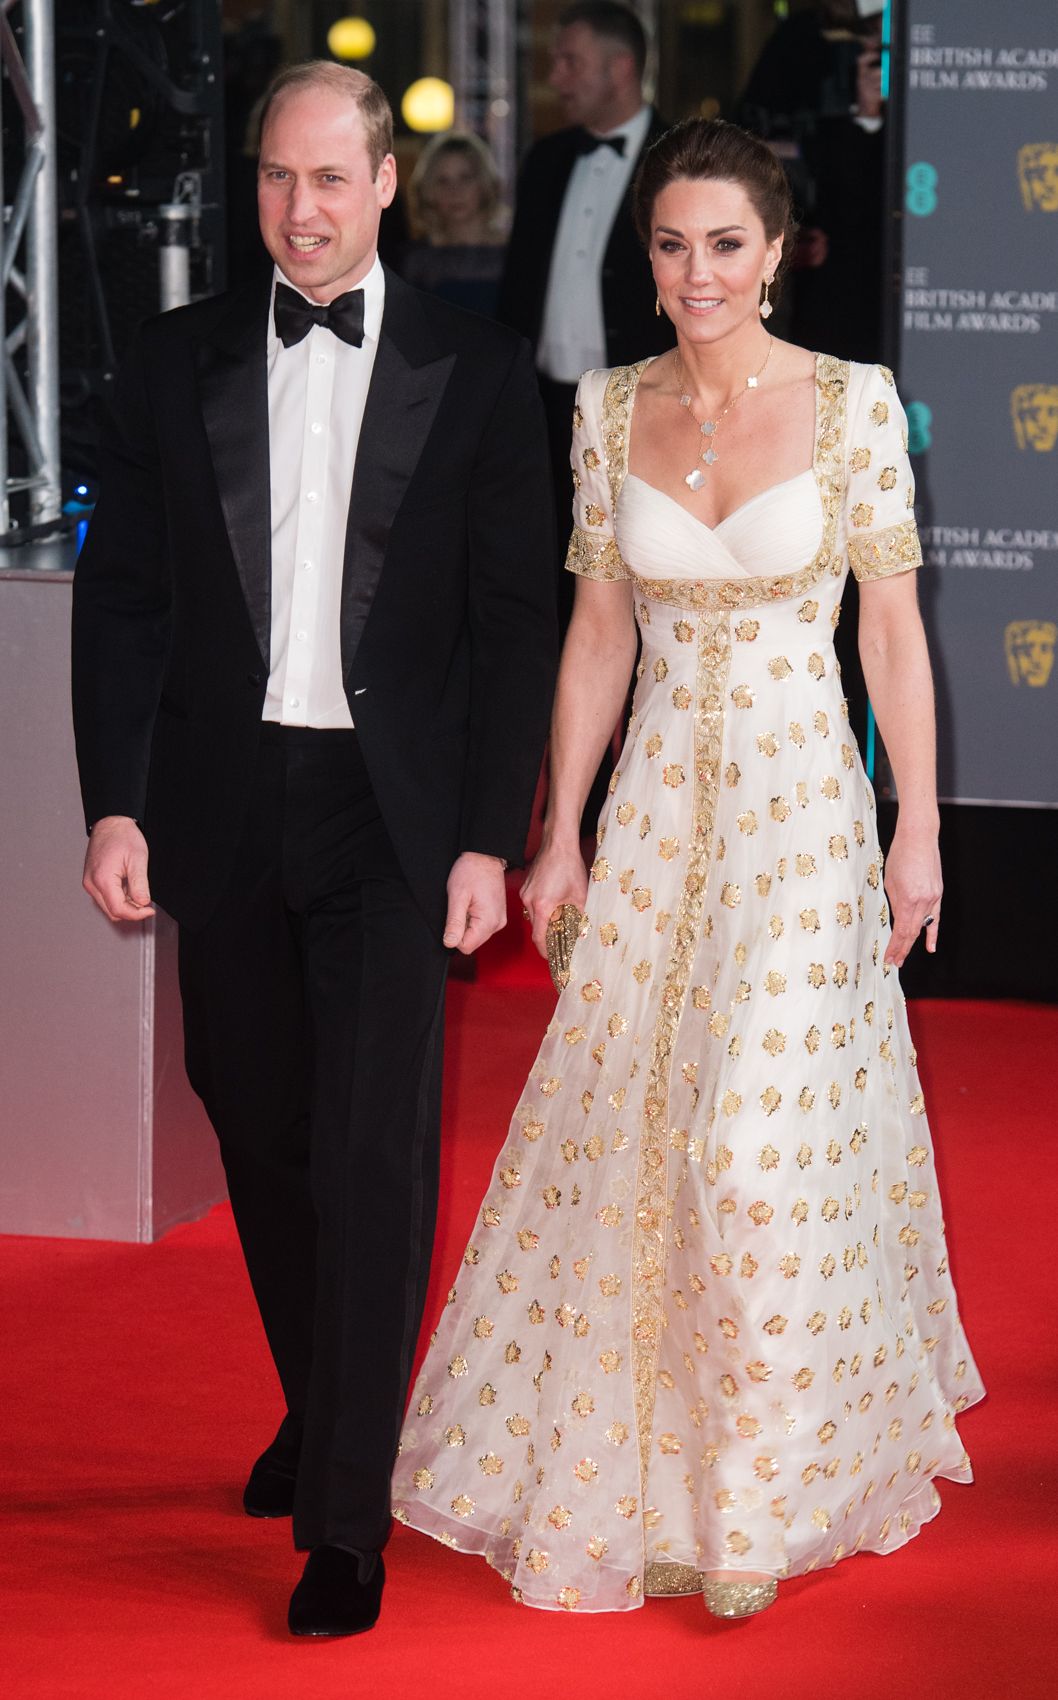 Kate Middleton's 2019 BAFTAs Look: White Gown, Glittery Silver Pumps